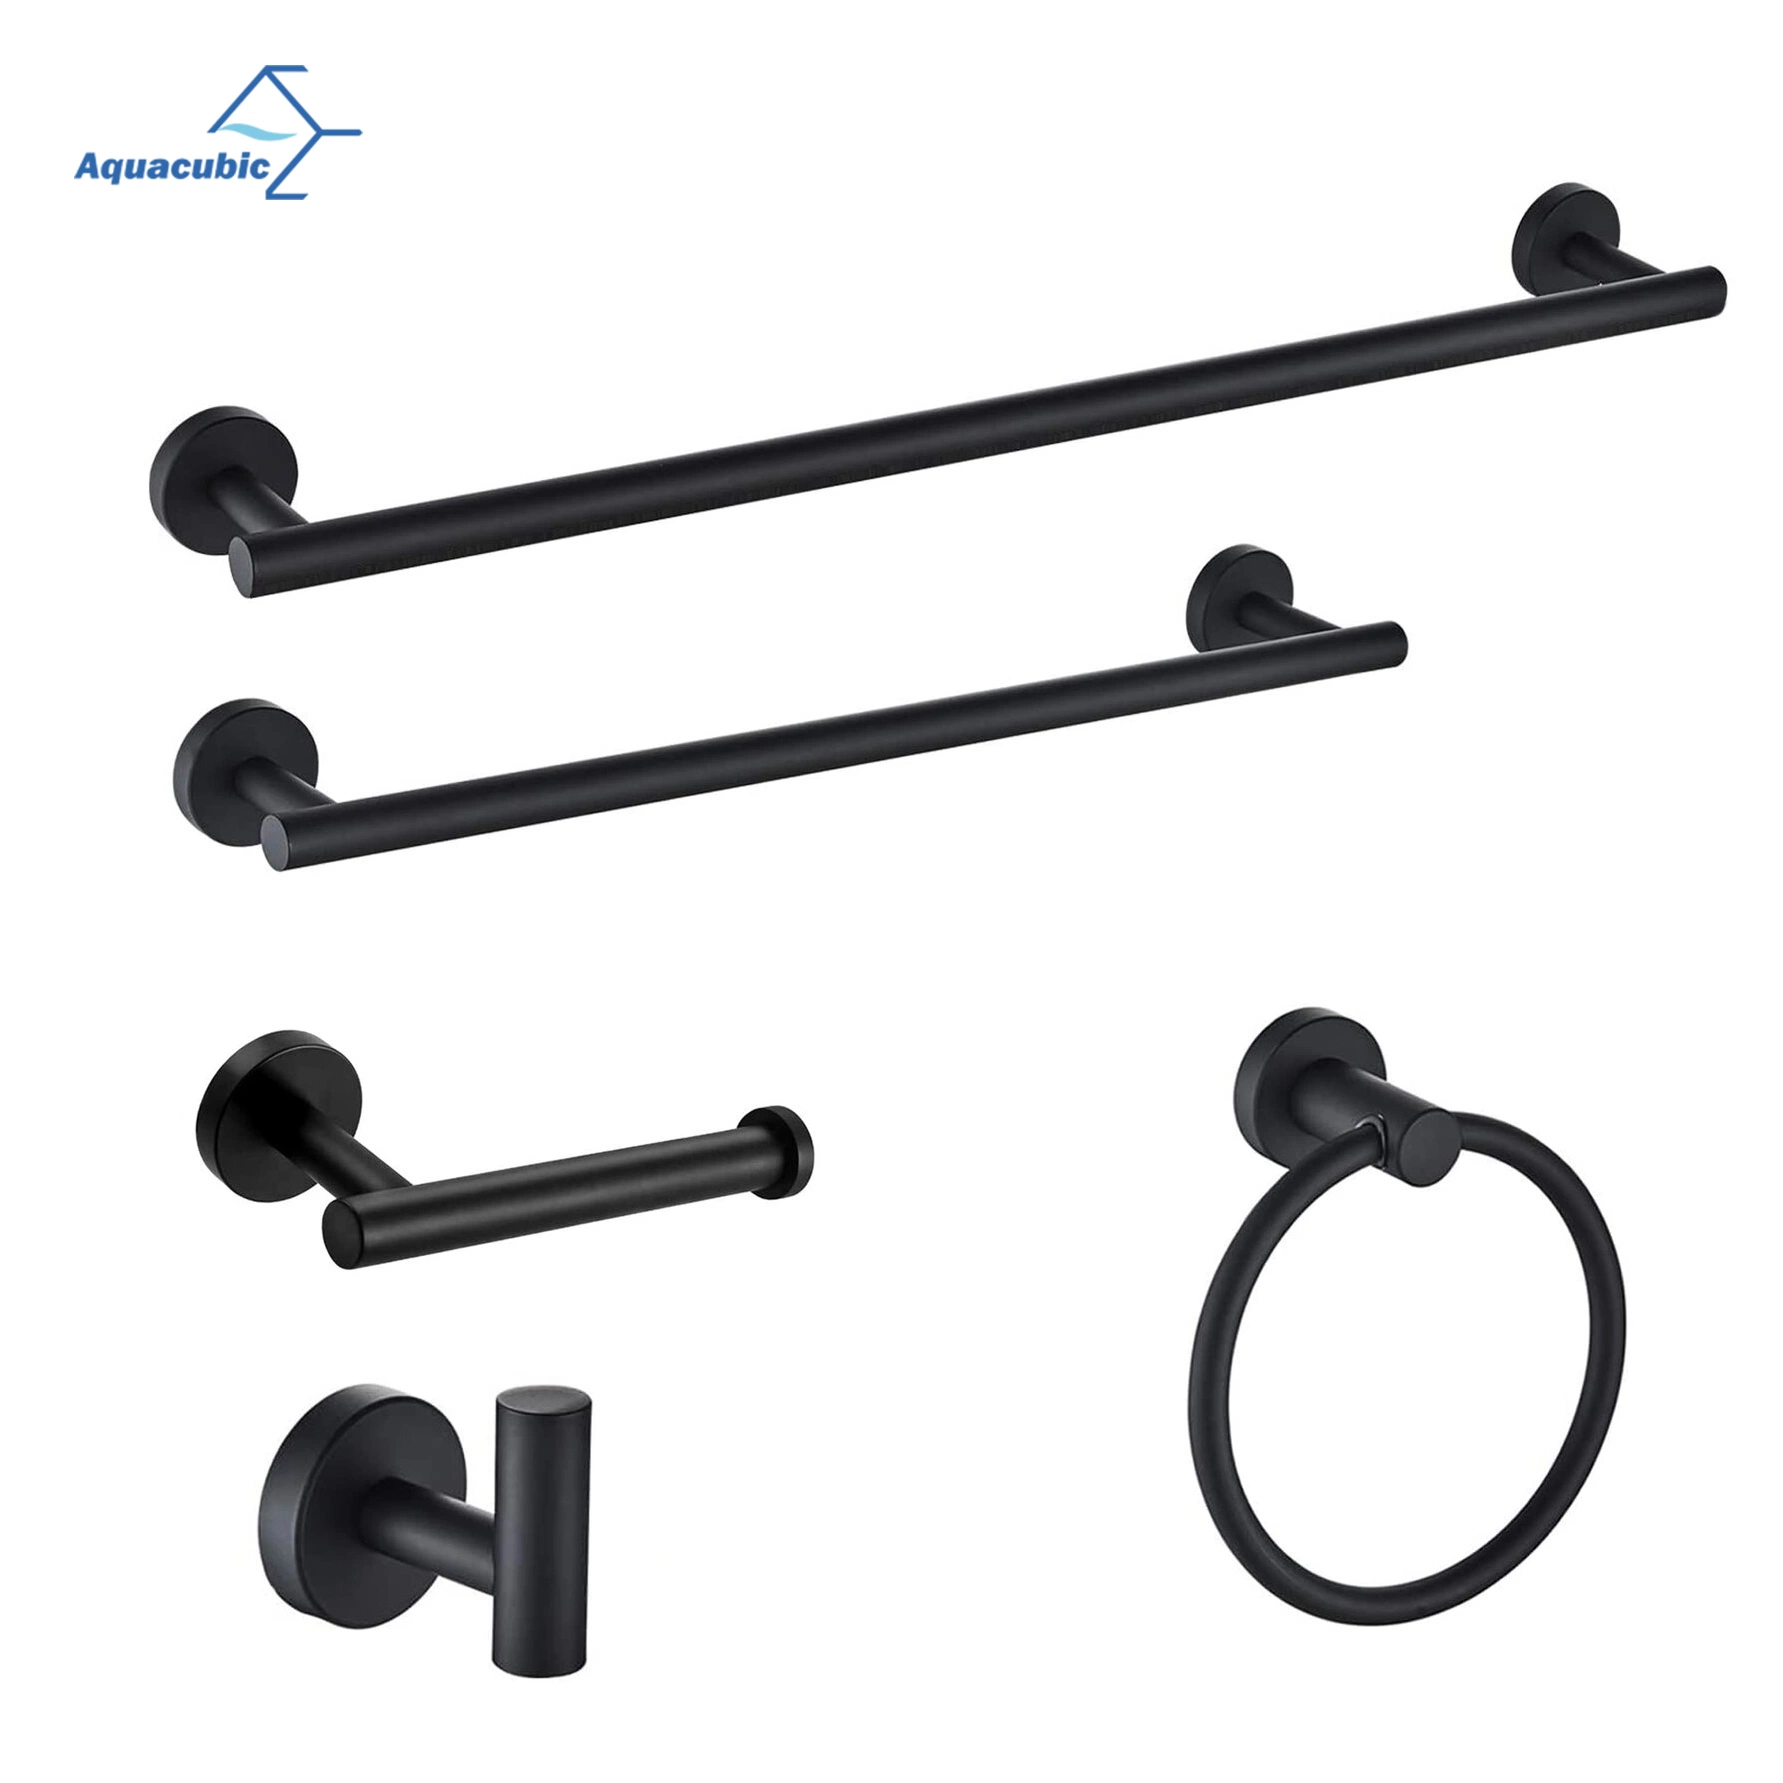 Aquacubic High Quality Manufacturer SUS 304 Stainless Steel Home Bathroom Accessories Hardware Set Black